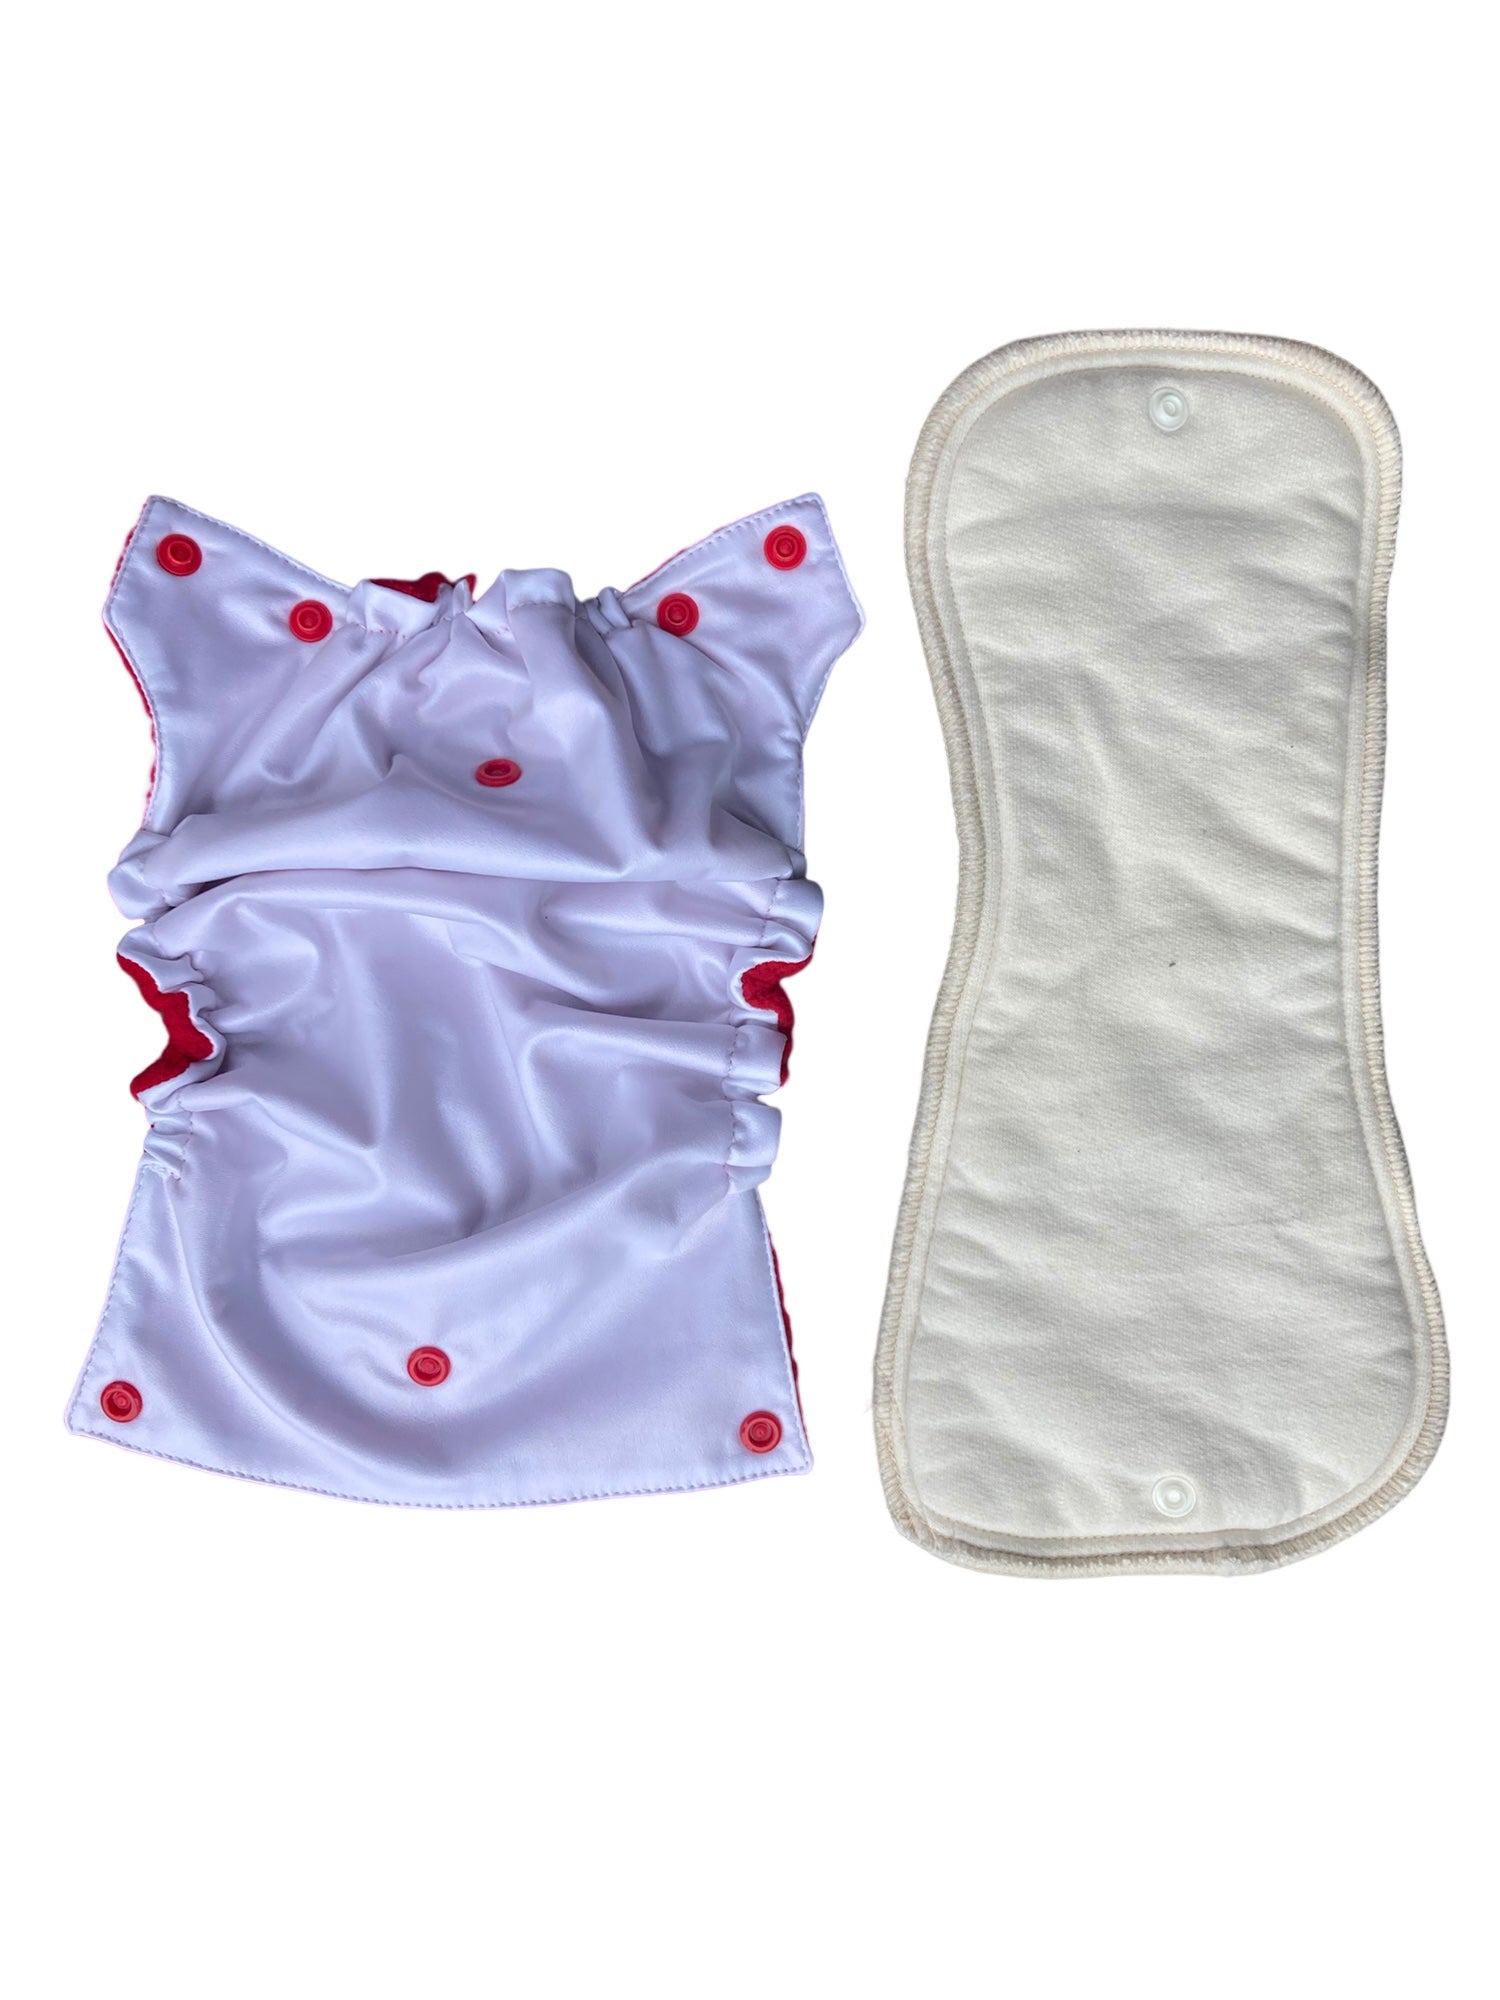 Candy Apple Red Fleece All-In-Two Flappy-Nappy Diaper Cover